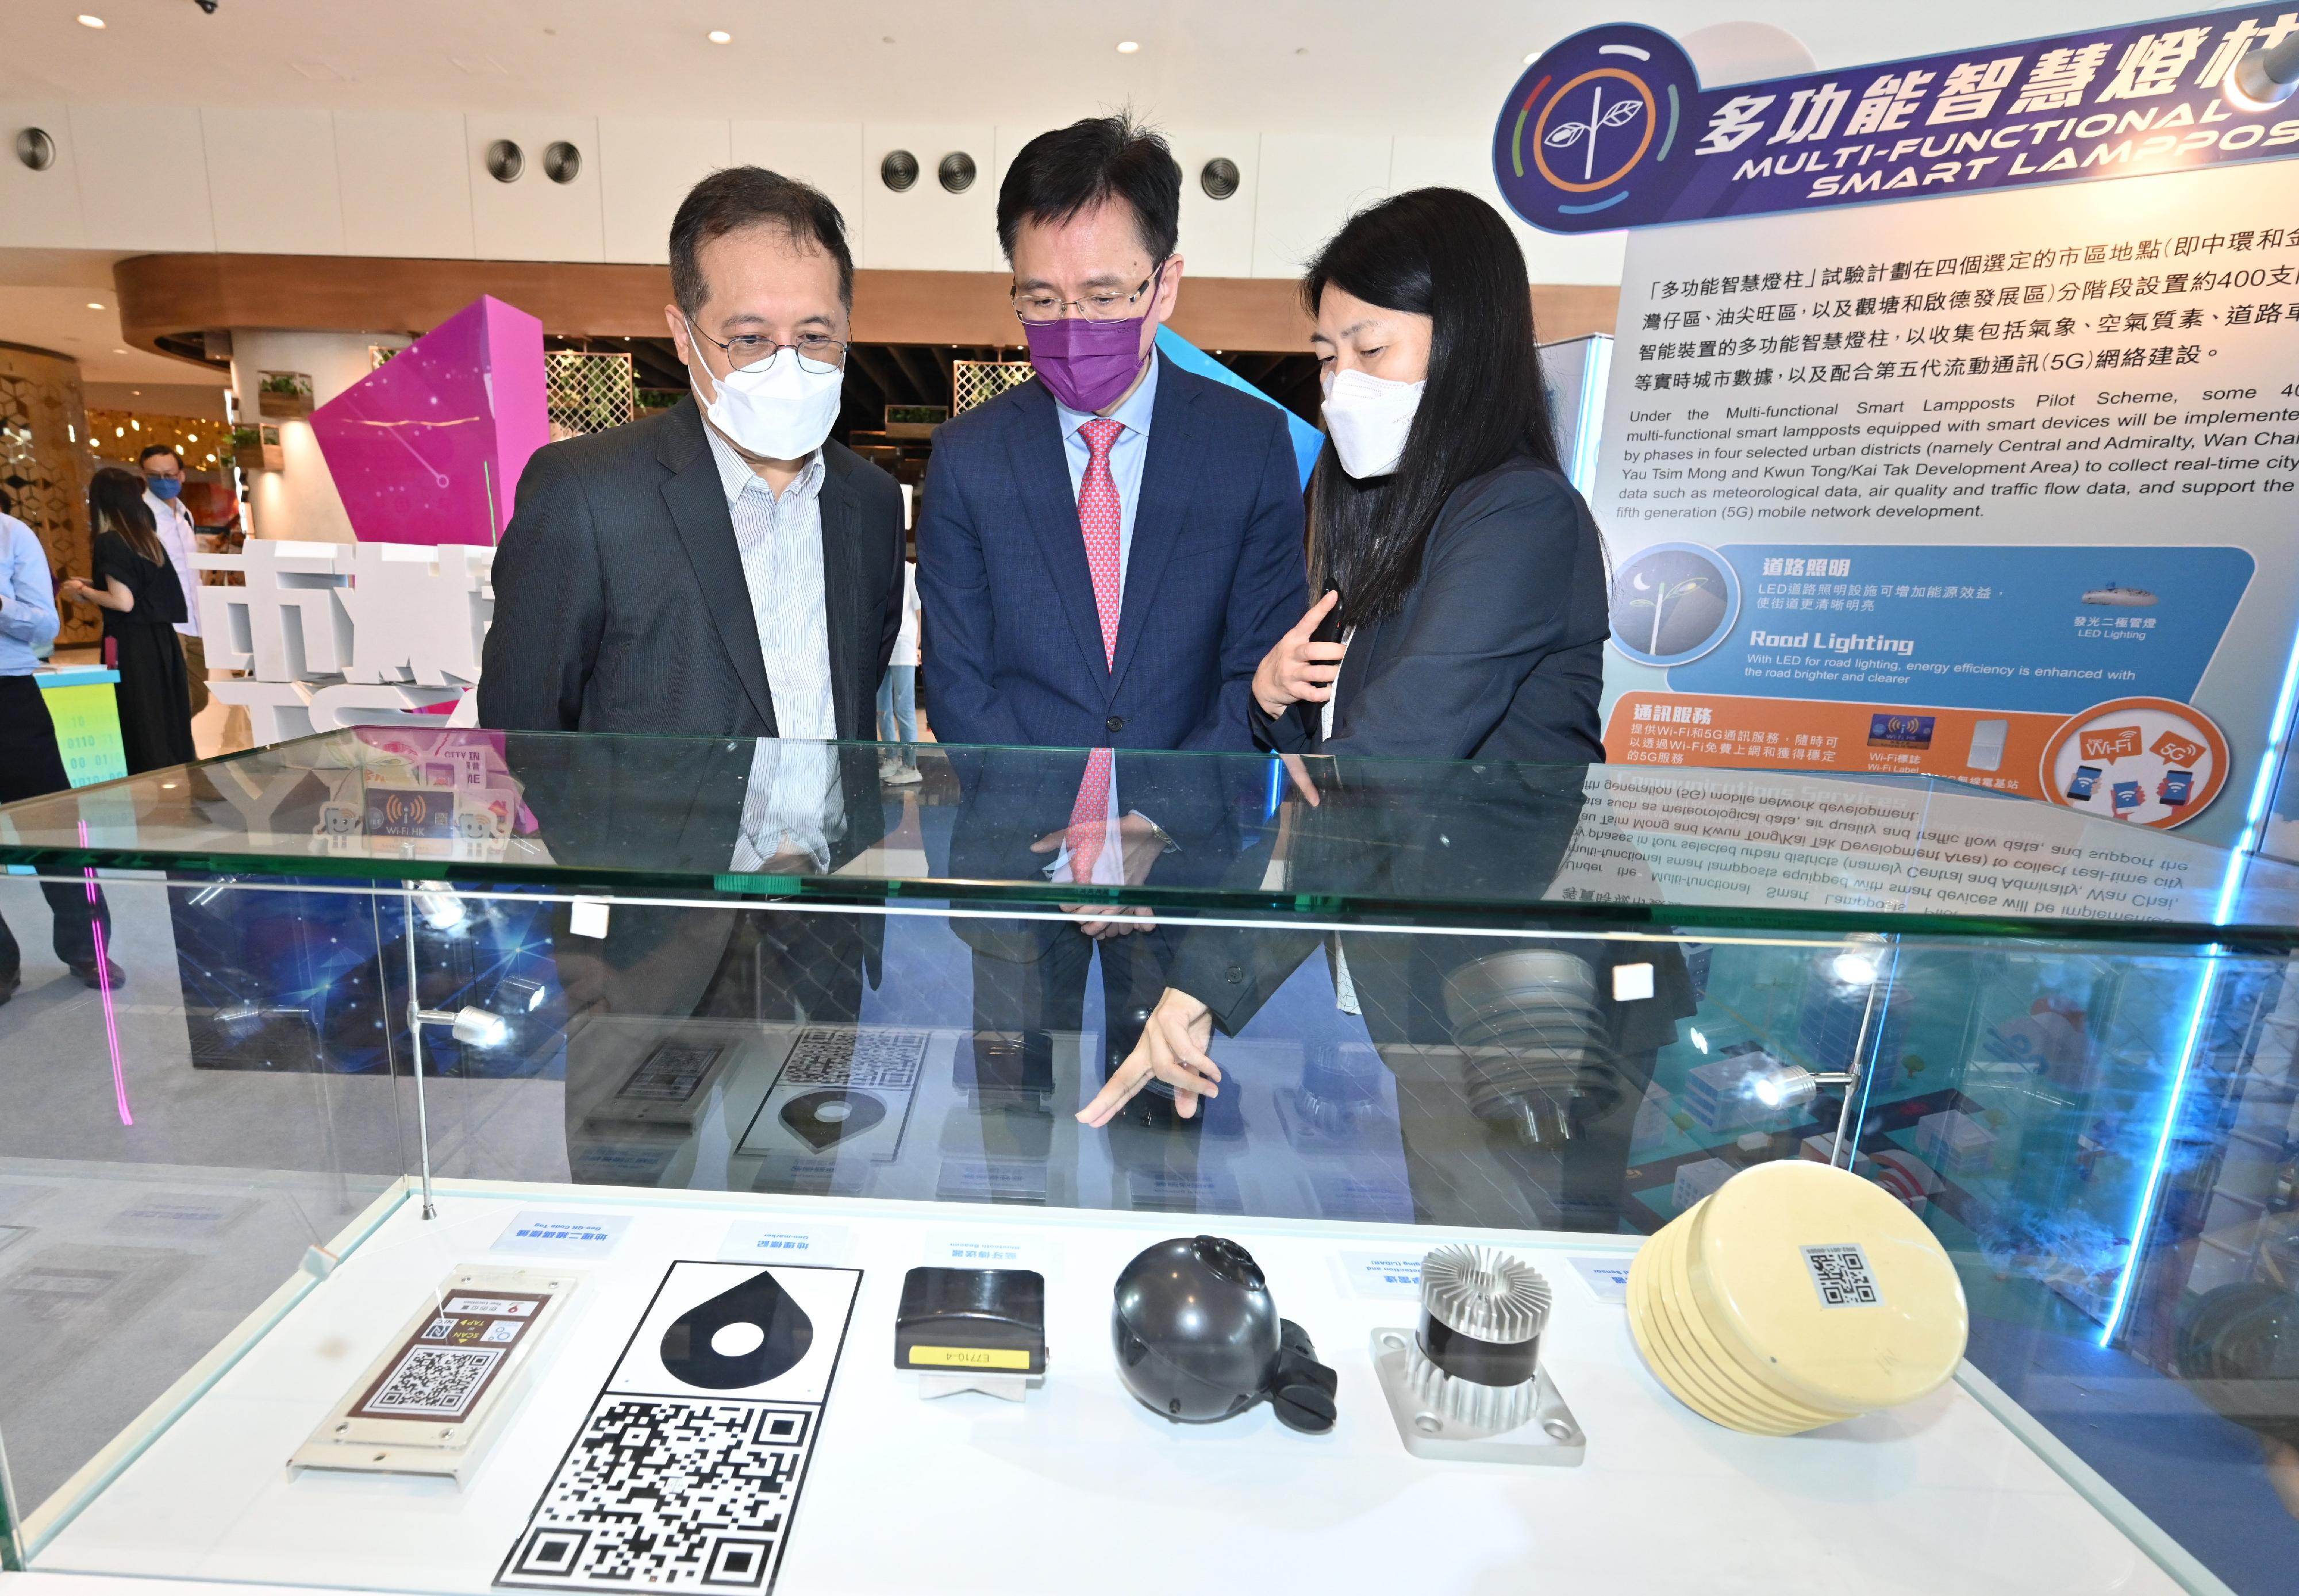 The Secretary for Innovation, Technology and Industry, Professor Sun Dong (centre), today (August 26) visited the Smart City Roving Exhibition launched by the Office of the Government Chief Information Officer at the D·Park, Tsuen Wan, and received a briefing on the devices of the Multi-functional Smart Lampposts. Looking on is the Acting Deputy Government Chief Information Officer, Mr Kingsley Wong (left).